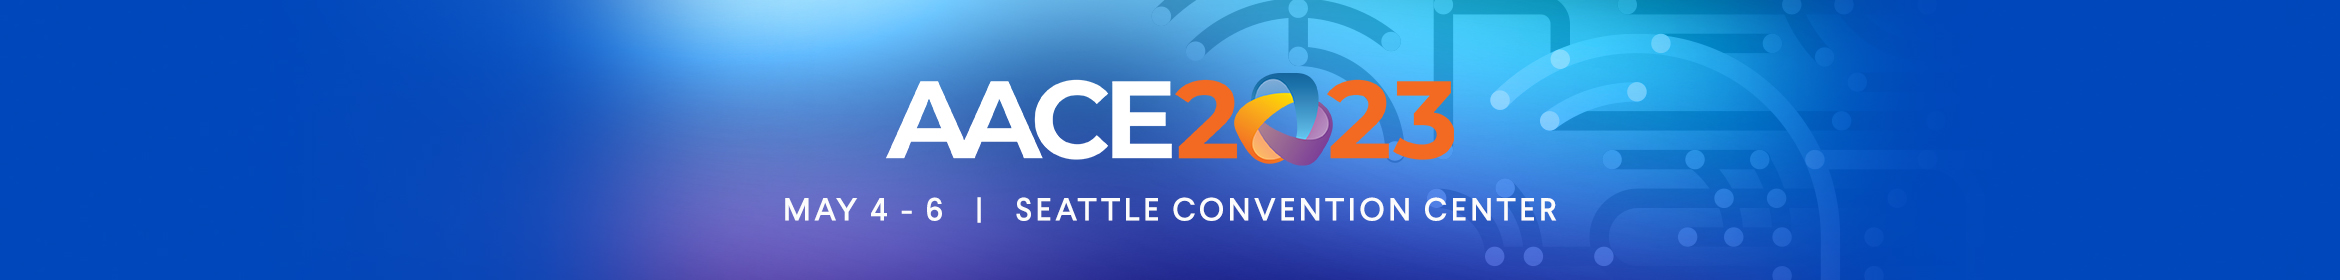 AACE Annual Meeting 2023 Main banner